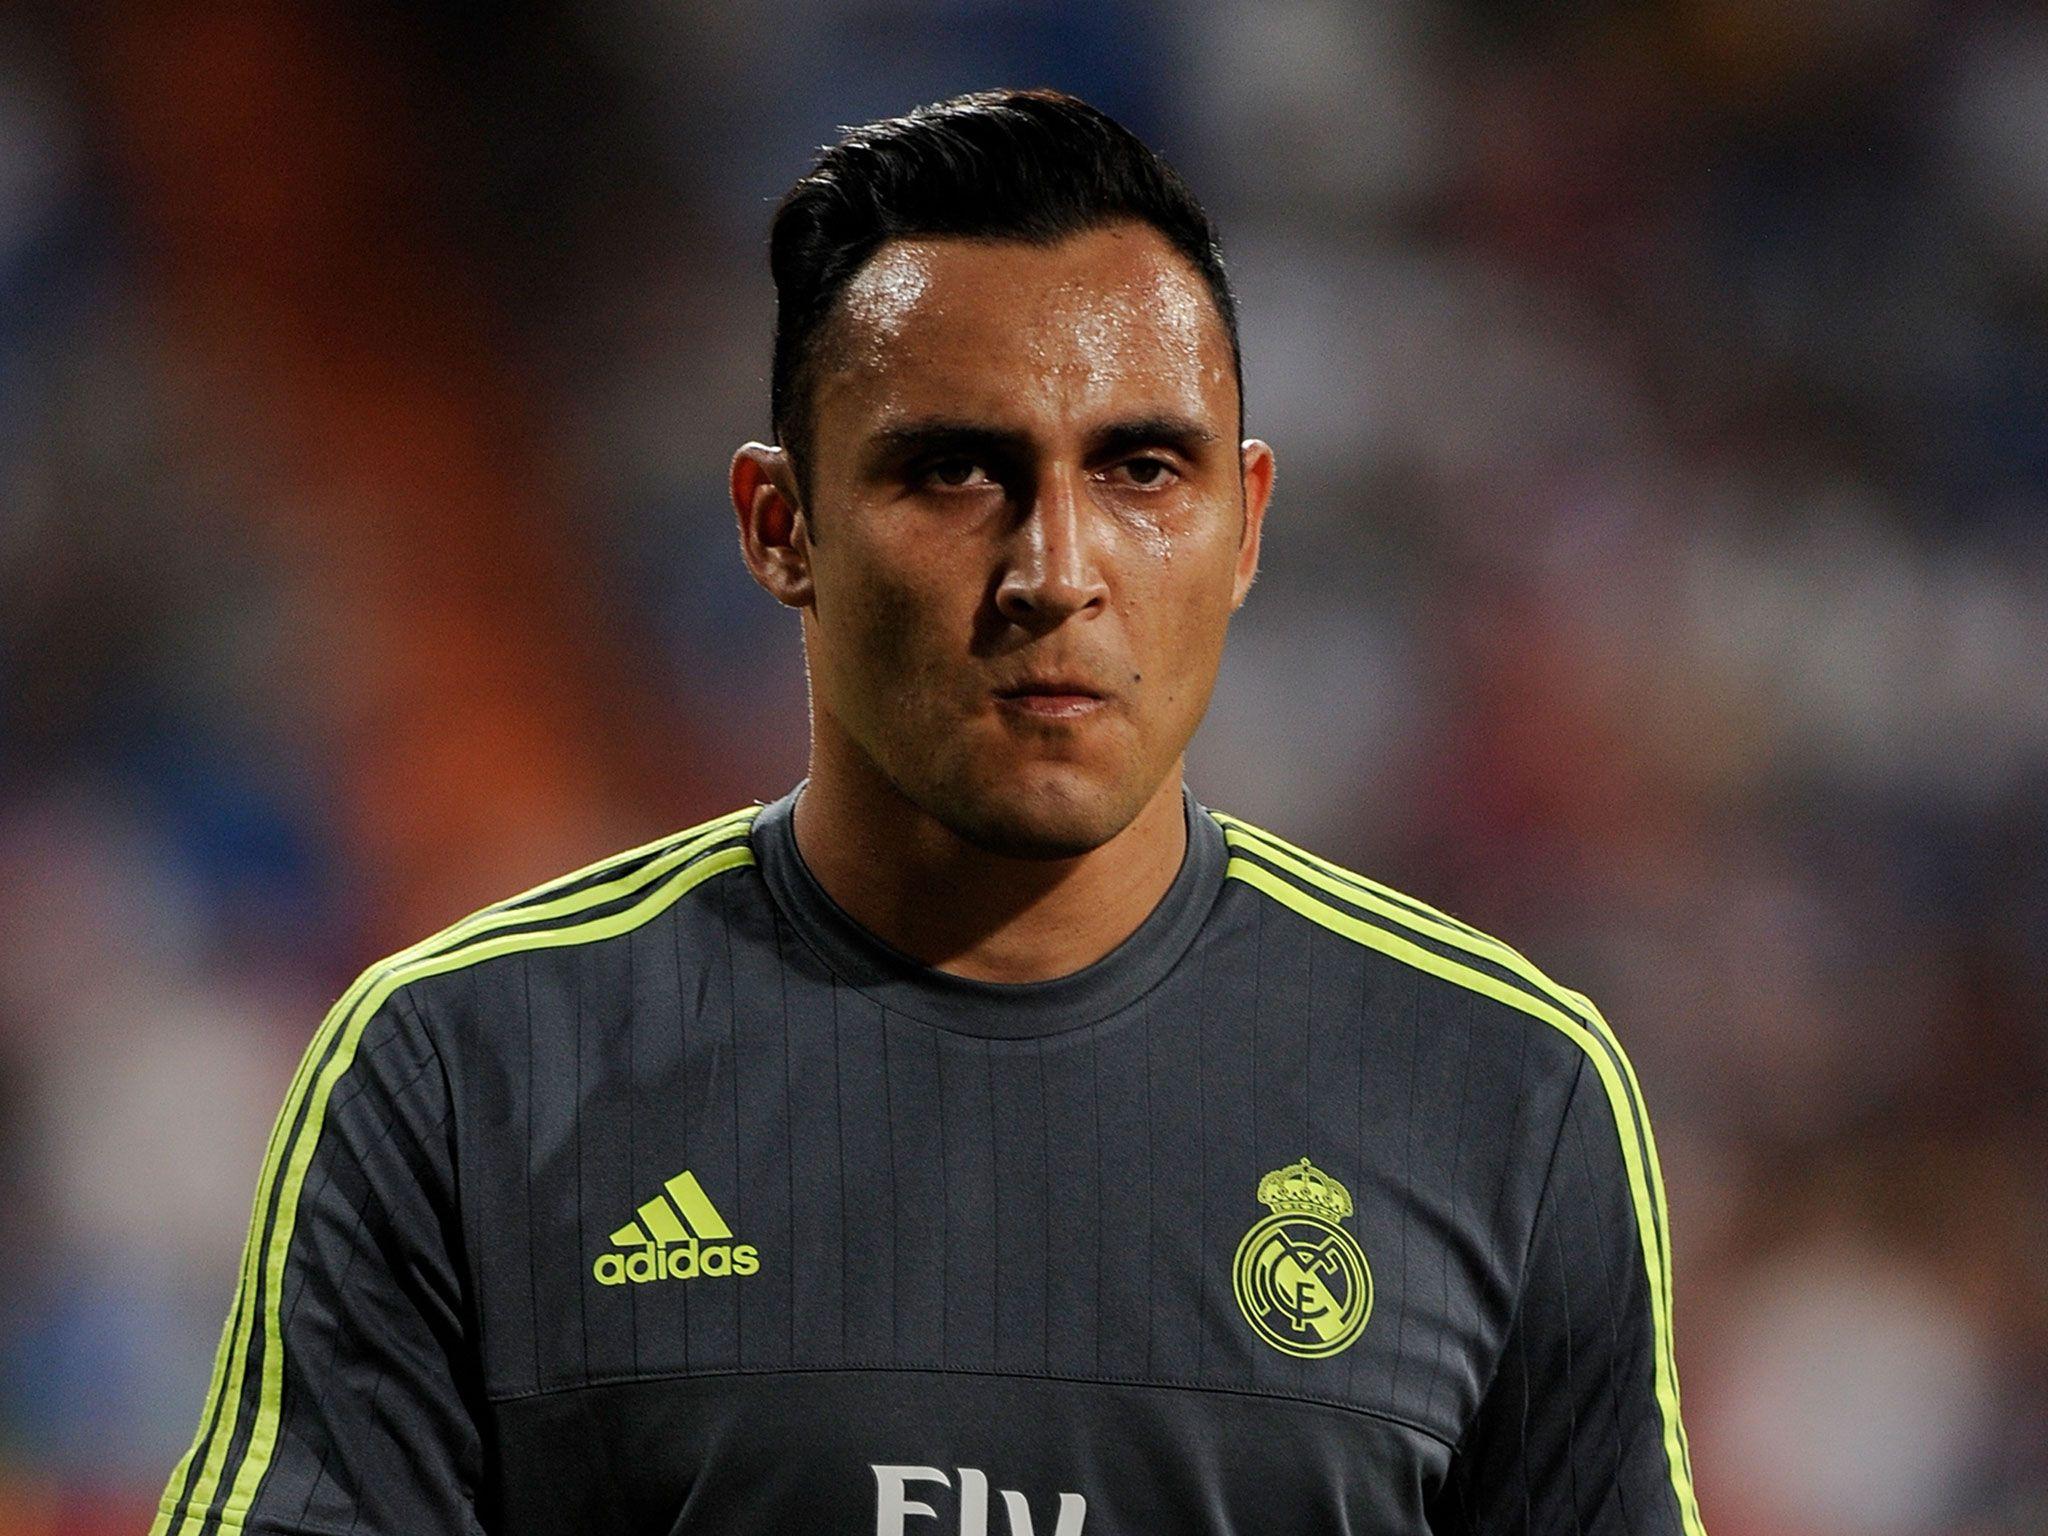 Keylor Navas reveals he cried when Manchester United transfer